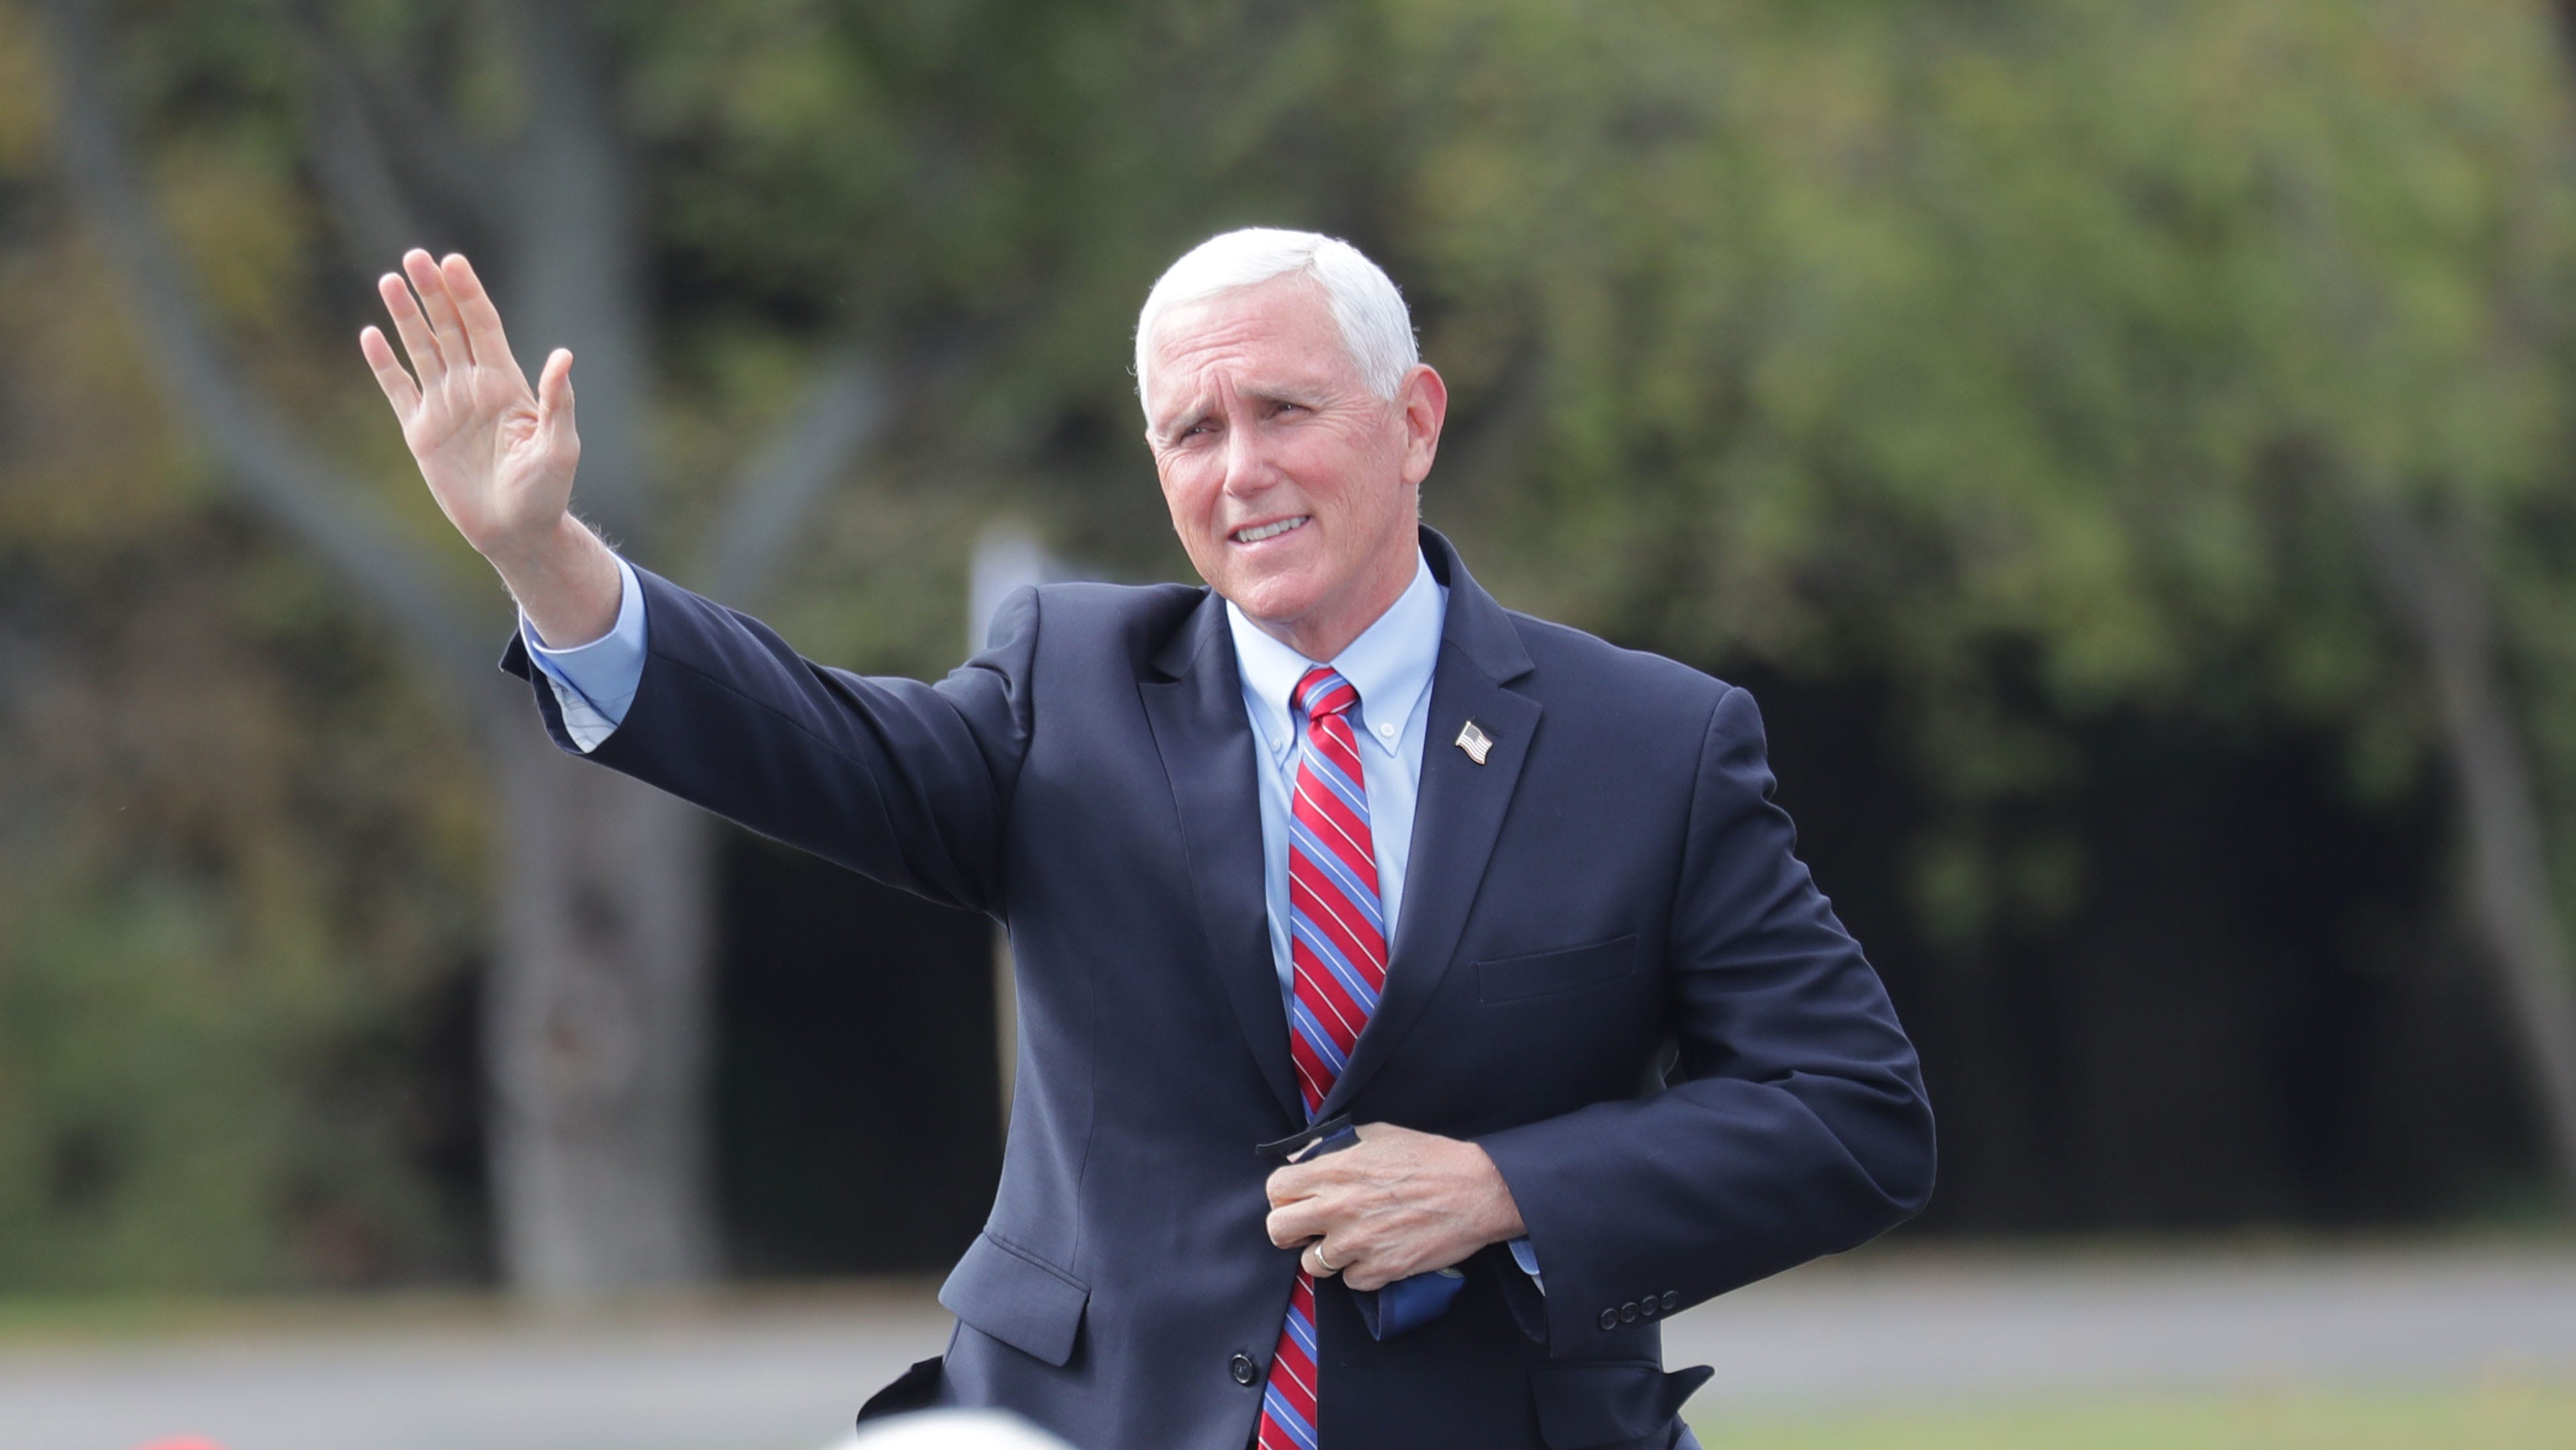 Vice President Mike Pence acknowledges applause during a campaign event at Weldall Manufacturing in Waukesha  on Tuesday, Oct. 13, 2020.